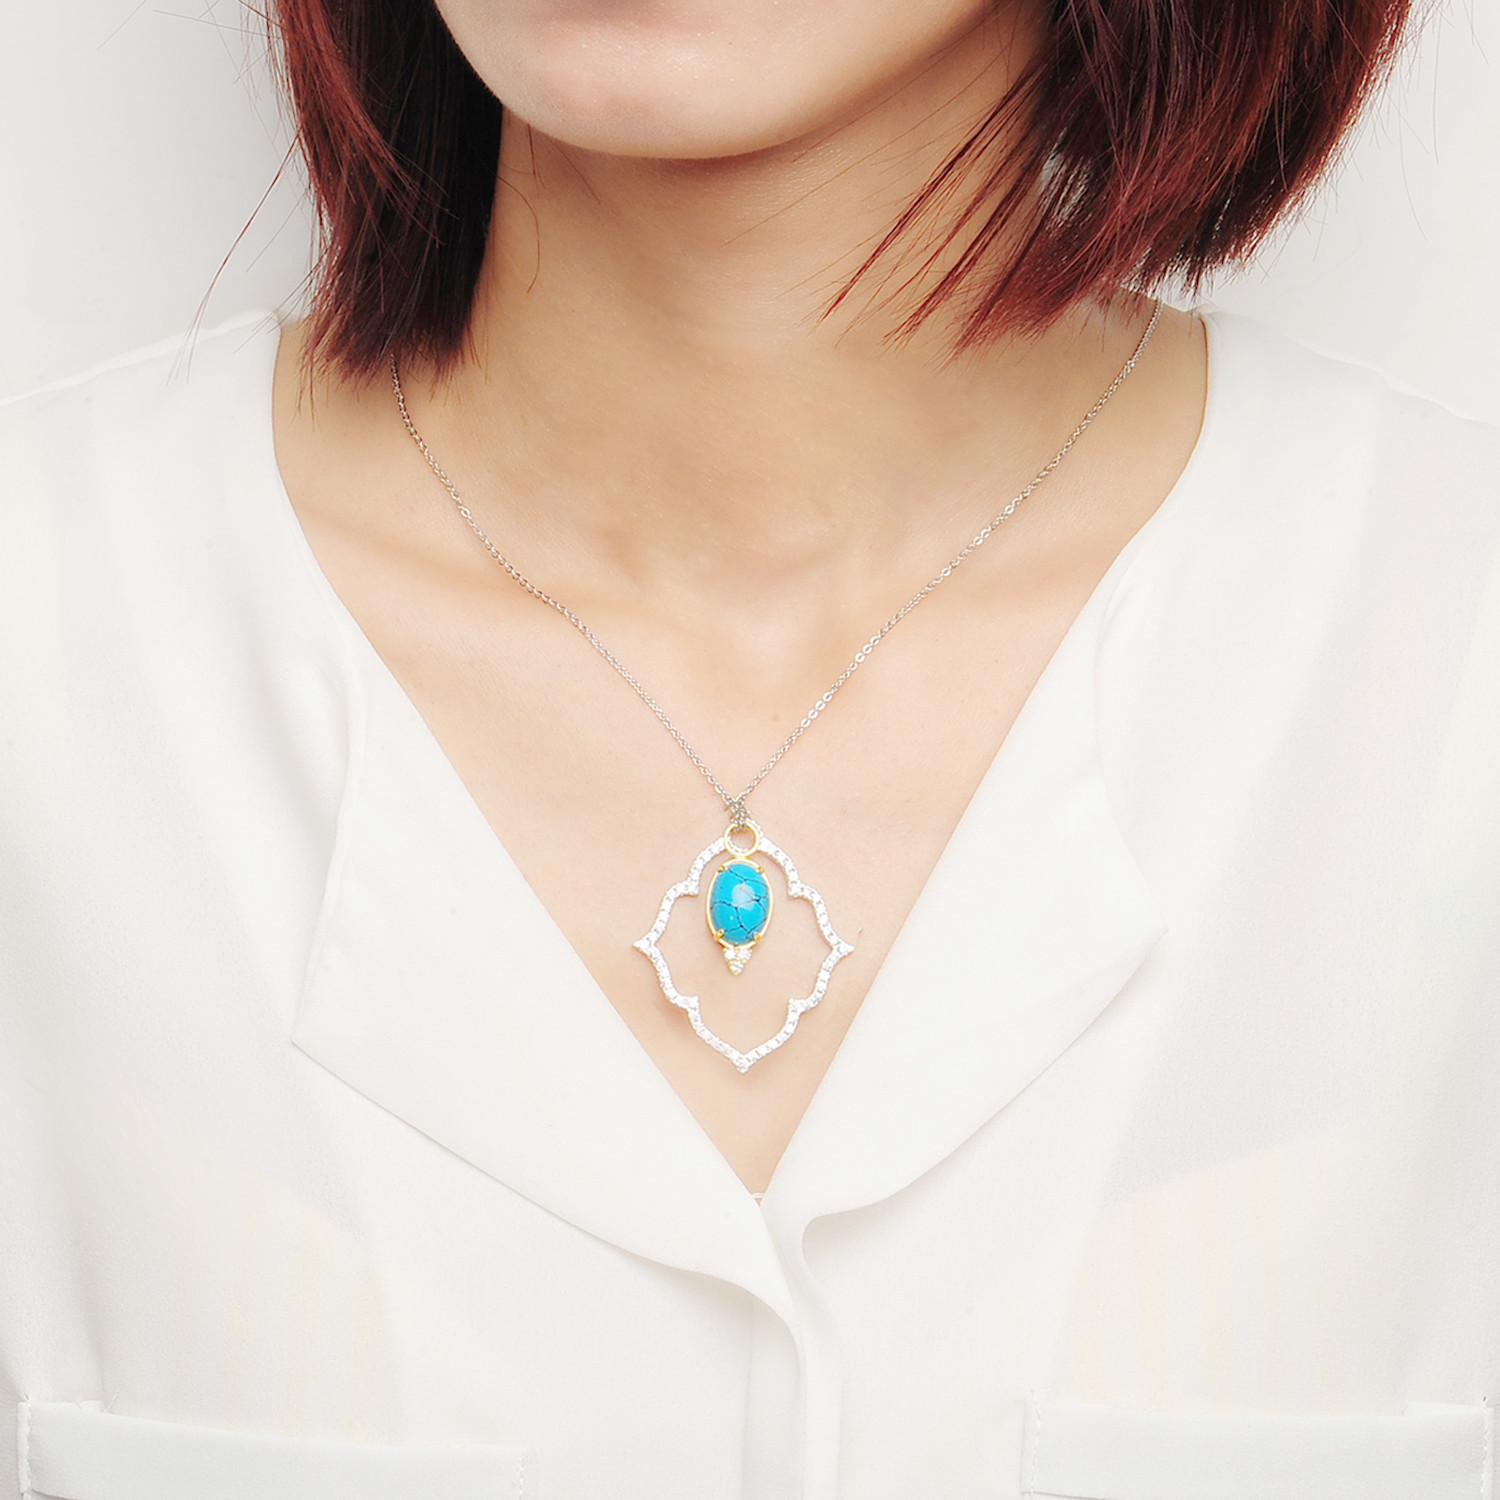 Luxurious Copper Jewelry Set Turquoise Stone Jewelry For Women Party(图1)